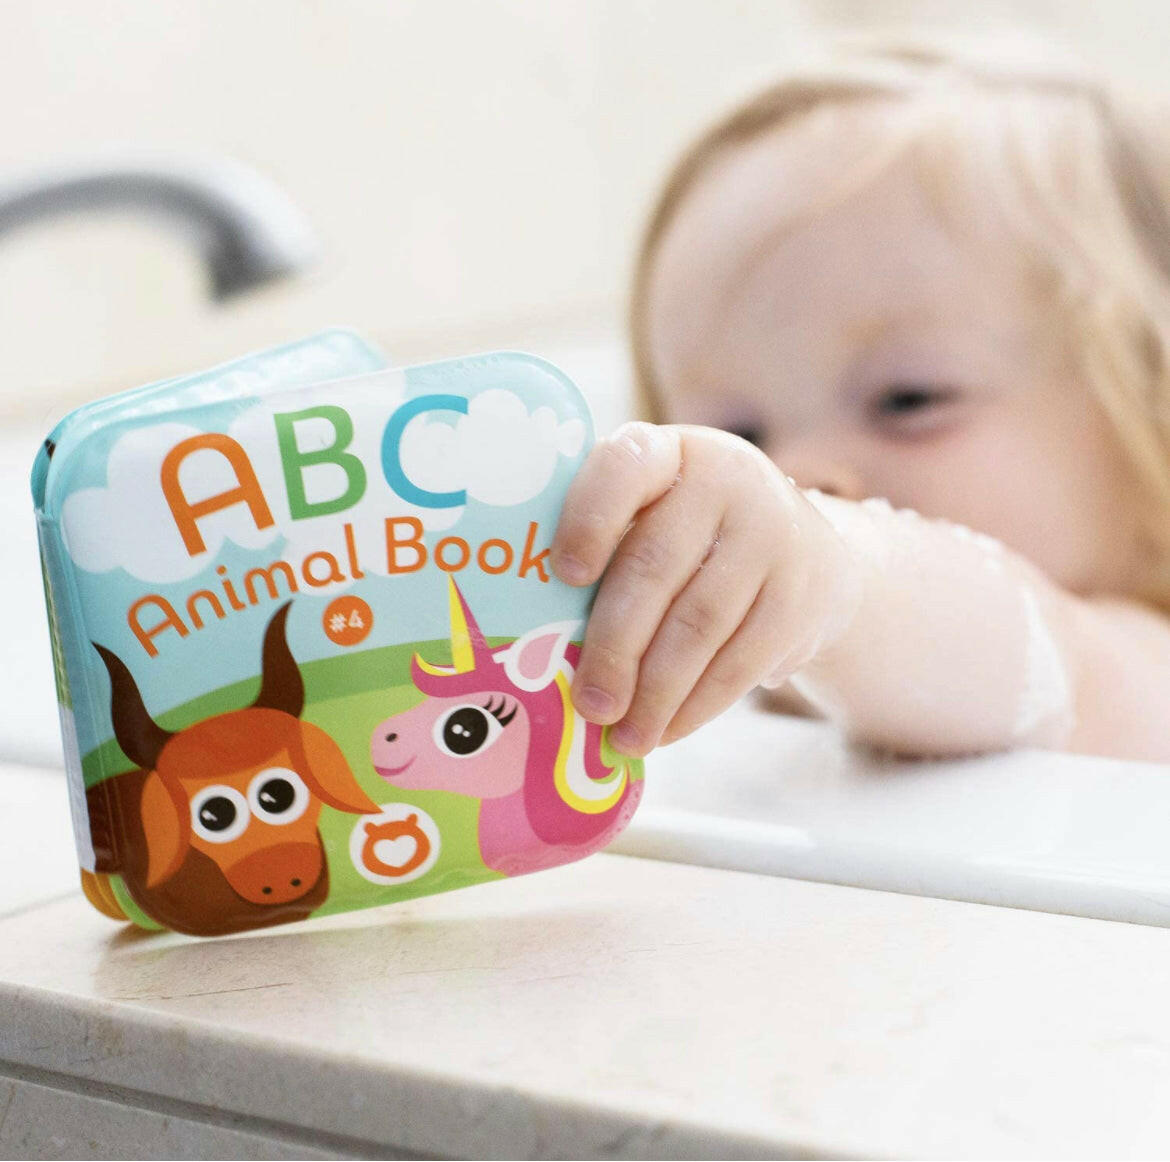 Floating Baby Bath Books,Waterproof Bathtime Toys for Toddlers.